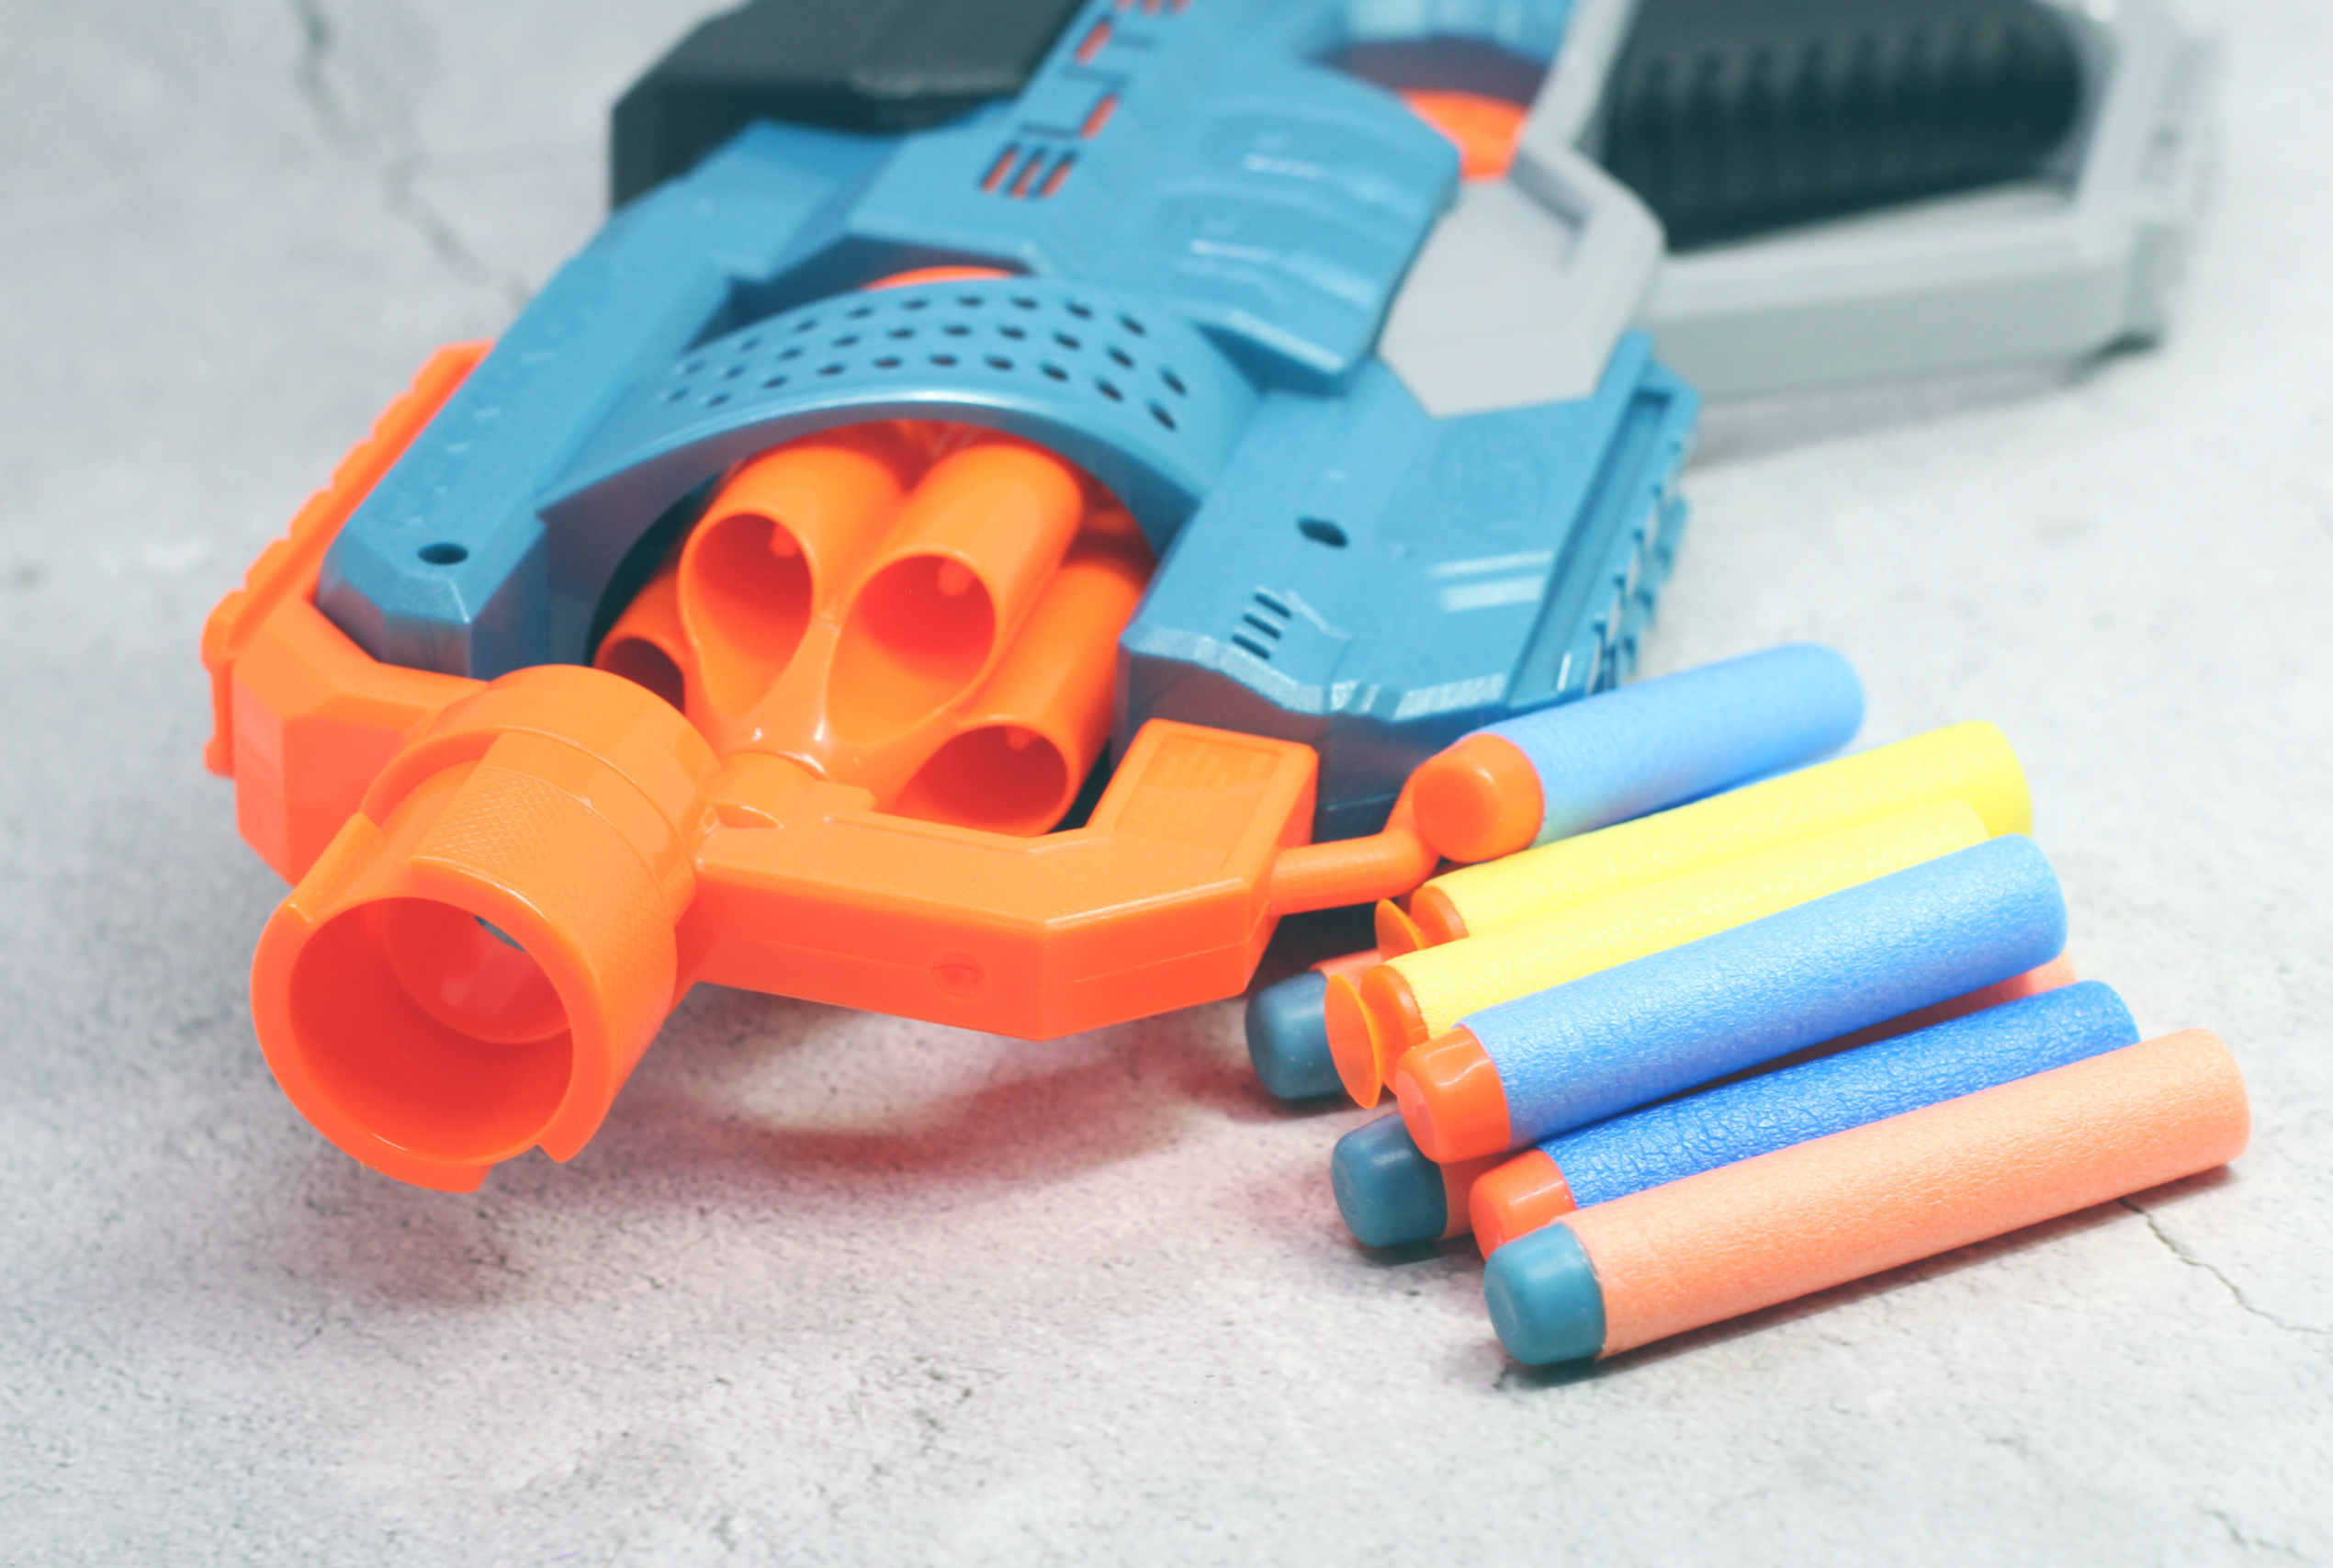 An image of a nerf blaster.